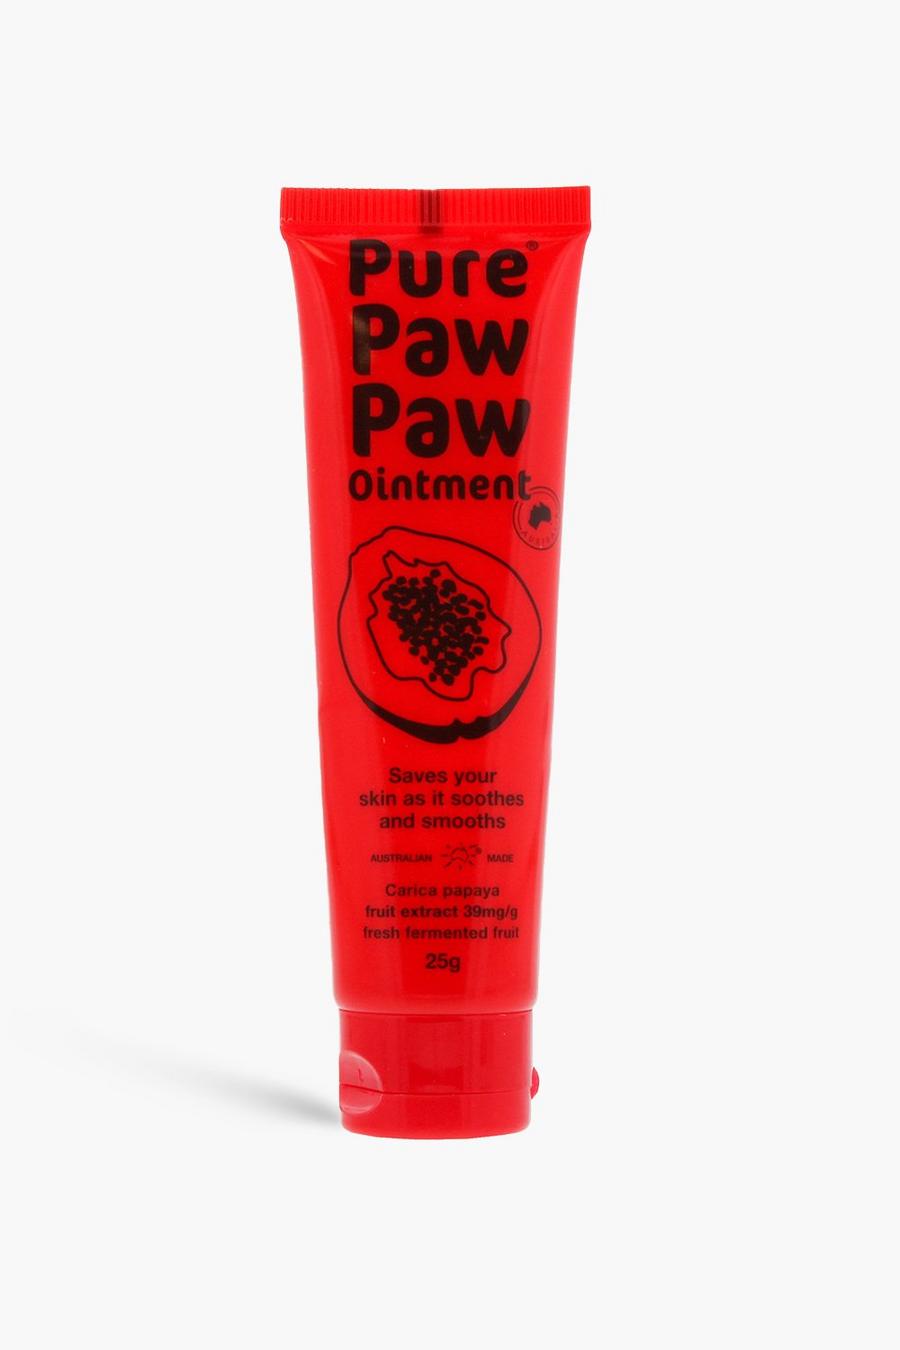 PURE PAW PAW 25G OINTMENT, Red rot